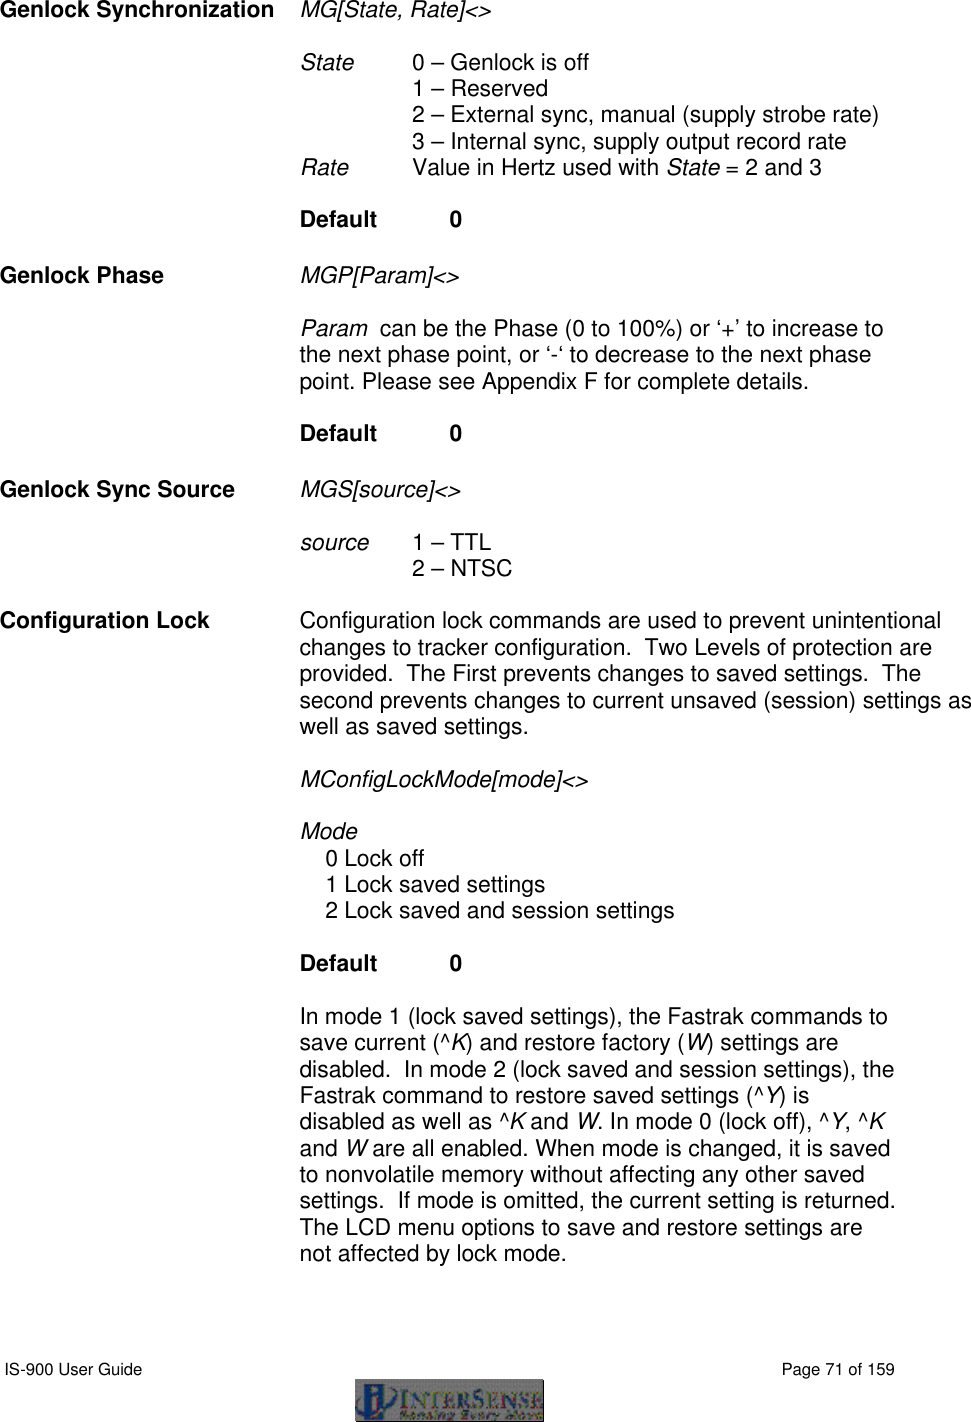  IS-900 User Guide                                                                                                                                          Page 71 of 159  Genlock Synchronization   MG[State, Rate]&lt;&gt;   State   0 – Genlock is off 1 – Reserved 2 – External sync, manual (supply strobe rate) 3 – Internal sync, supply output record rate Rate Value in Hertz used with State = 2 and 3  Default  0 Genlock Phase   MGP[Param]&lt;&gt;   Param  can be the Phase (0 to 100%) or ‘+’ to increase to the next phase point, or ‘-‘ to decrease to the next phase point. Please see Appendix F for complete details.  Default  0 Genlock Sync Source MGS[source]&lt;&gt;  source 1 – TTL 2 – NTSC  Configuration Lock Configuration lock commands are used to prevent unintentional changes to tracker configuration.  Two Levels of protection are provided.  The First prevents changes to saved settings.  The second prevents changes to current unsaved (session) settings as well as saved settings.   MConfigLockMode[mode]&lt;&gt;    Mode     0 Lock off     1 Lock saved settings     2 Lock saved and session settings           Default   0       In mode 1 (lock saved settings), the Fastrak commands to save current (^K) and restore factory (W) settings are disabled.  In mode 2 (lock saved and session settings), the Fastrak command to restore saved settings (^Y) is disabled as well as ^K and W. In mode 0 (lock off), ^Y, ^K and W are all enabled. When mode is changed, it is saved to nonvolatile memory without affecting any other saved settings.  If mode is omitted, the current setting is returned.  The LCD menu options to save and restore settings are not affected by lock mode.  